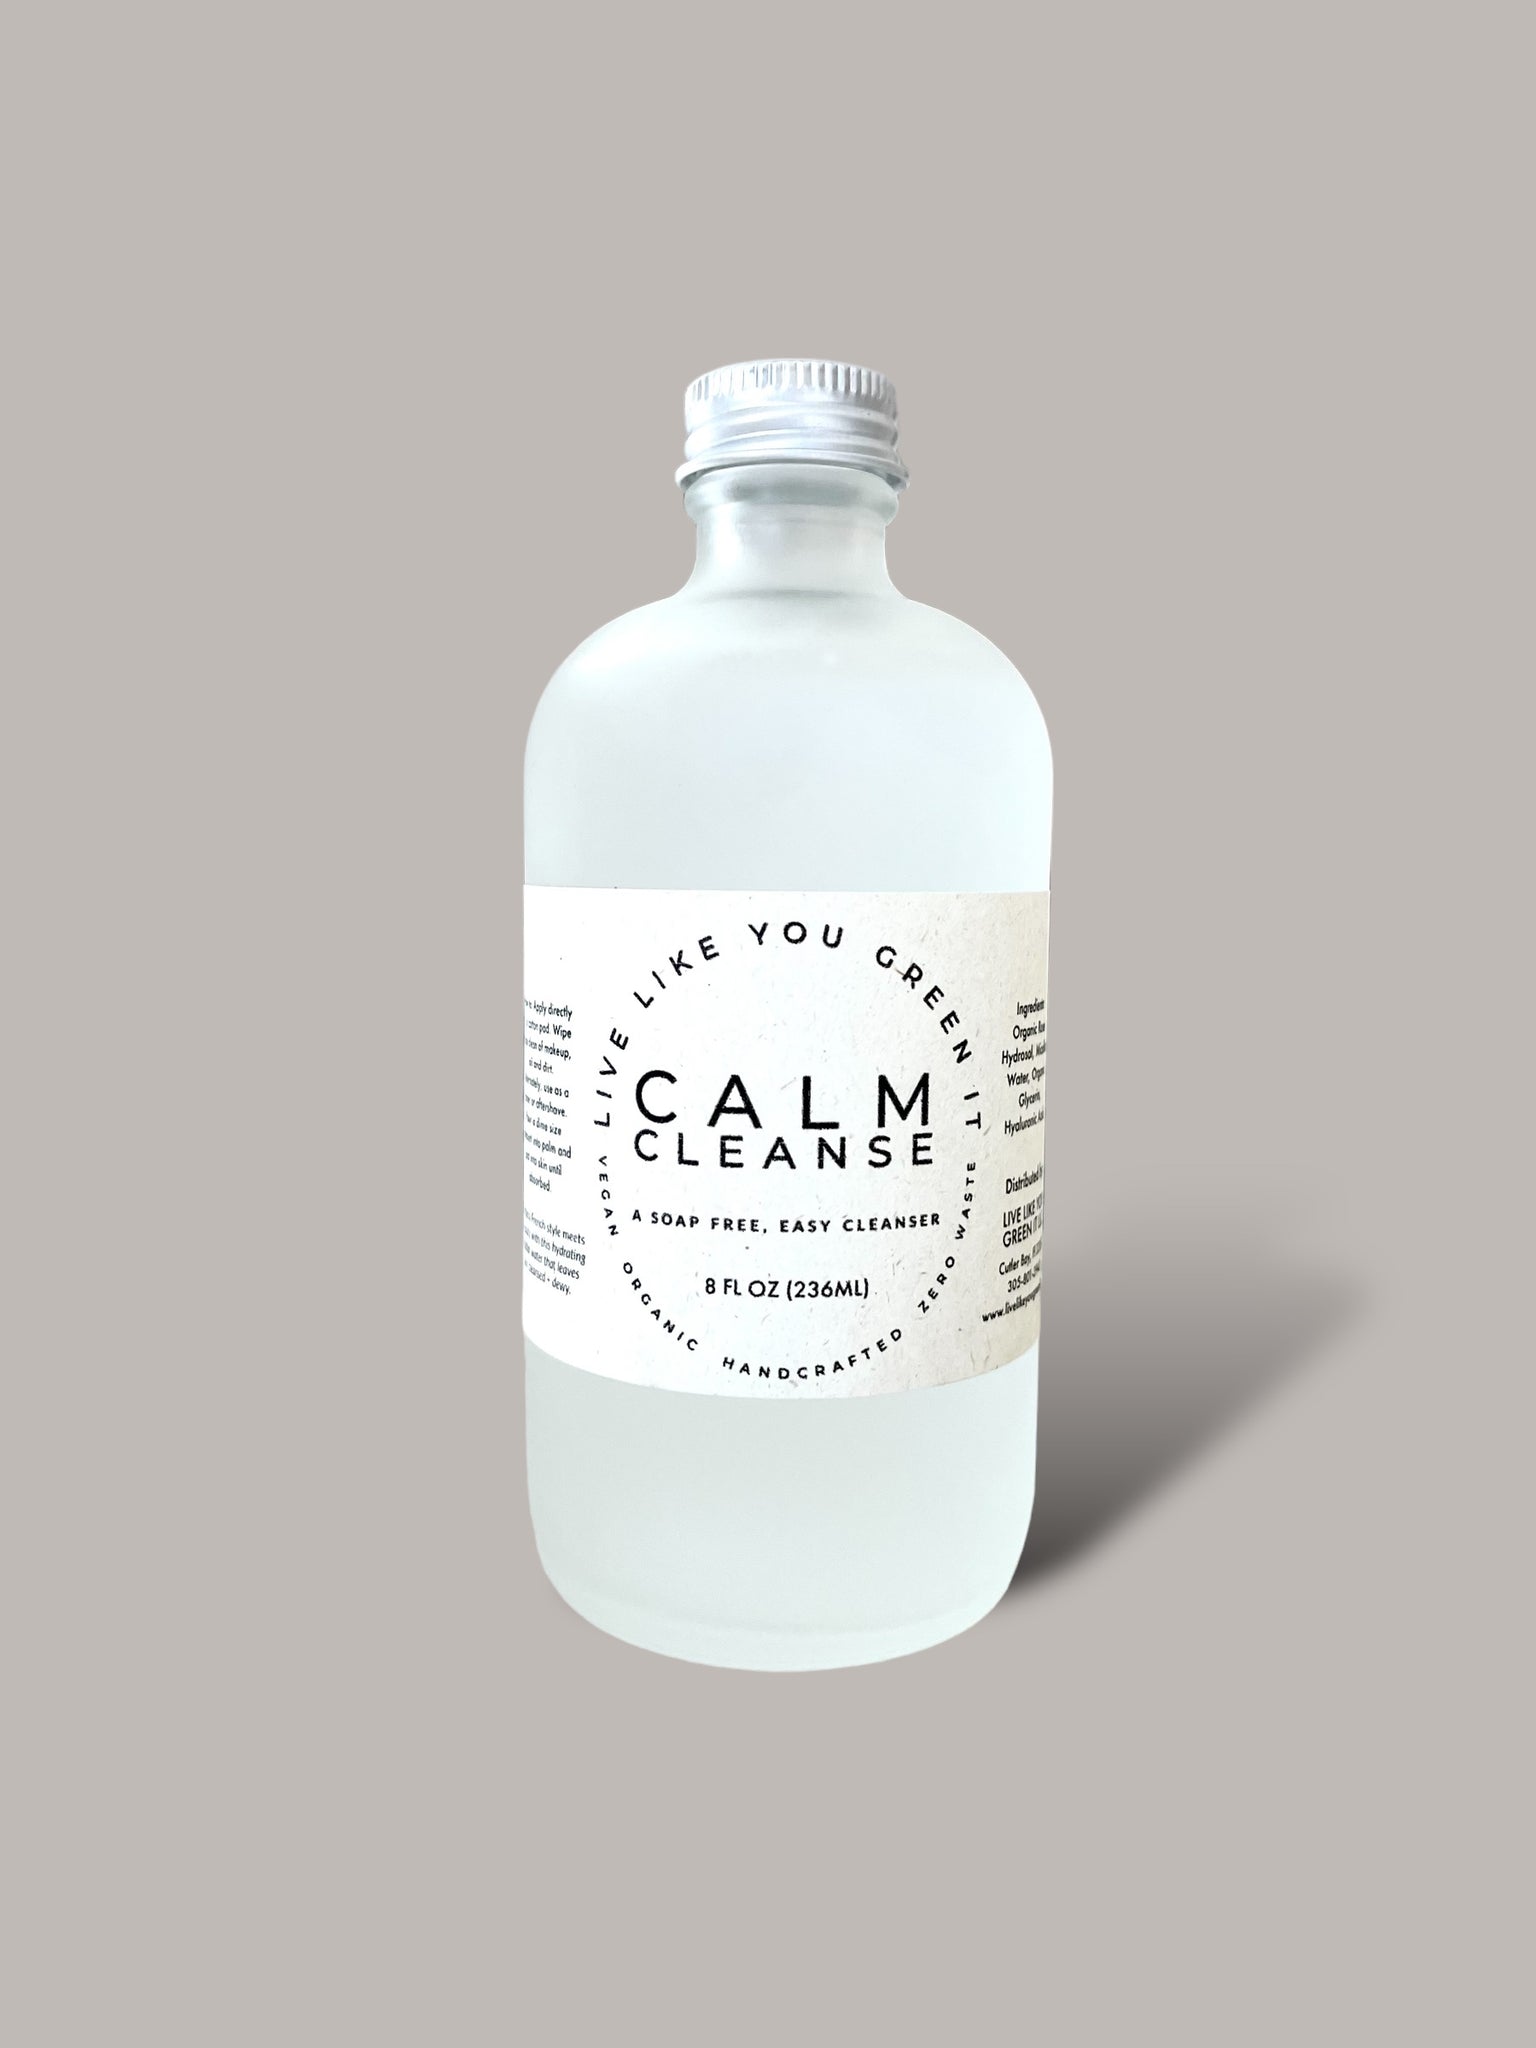 Calm Cleanse | Sensitive Skin Facial Cleanser with Rose Water Live Like You Green It